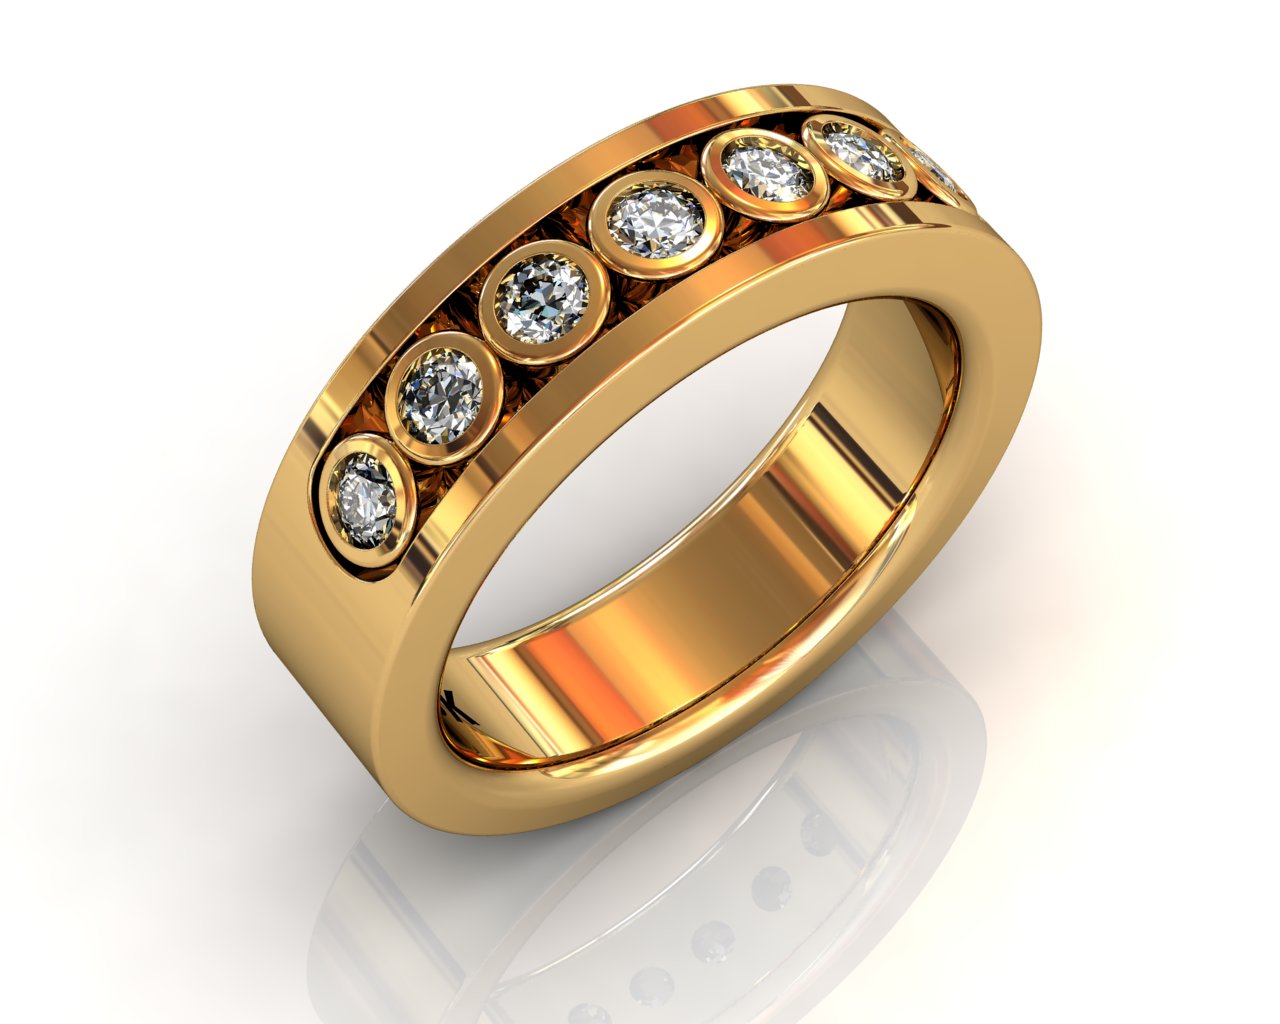 Wedding Bands Ladies Channel Bezel 7 Stone 0.41TCW Diamonds 12.62gr 18kt Yellow Gold South Bay Gold